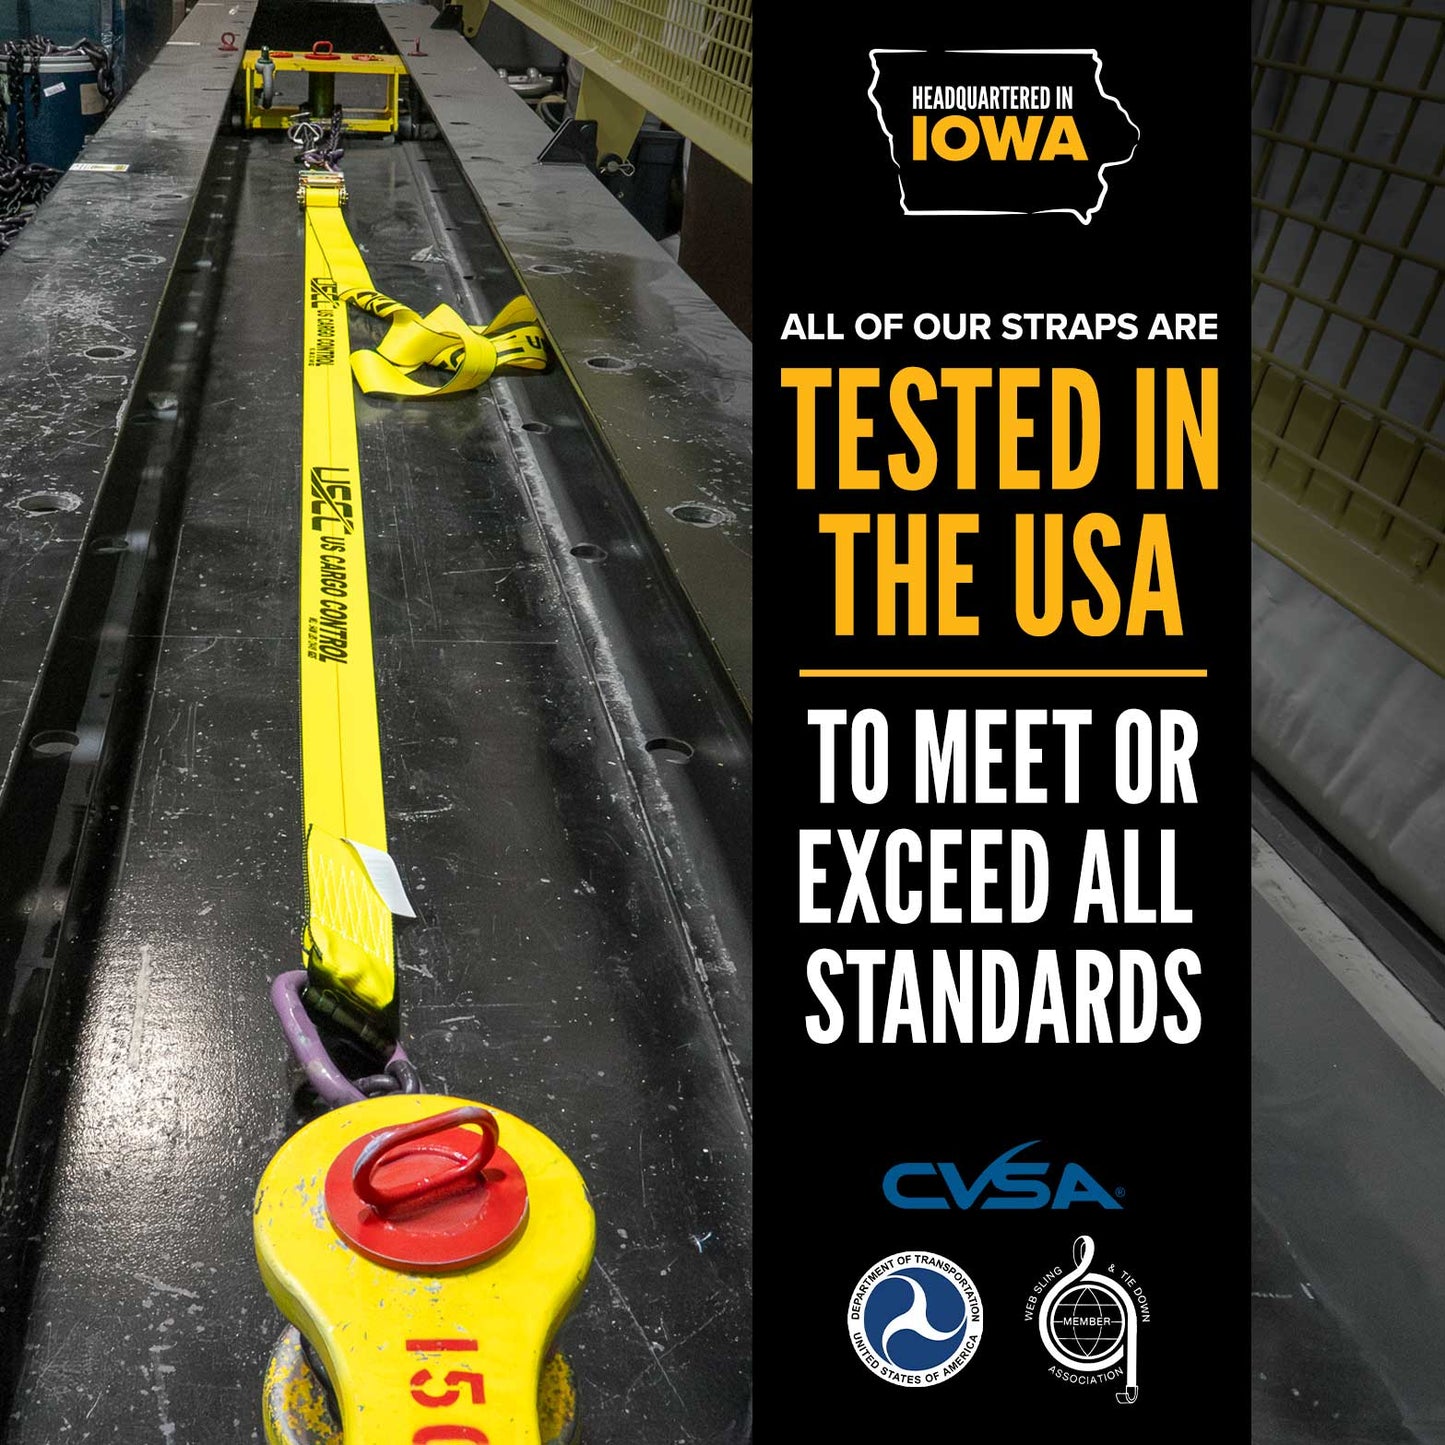 30' heavy duty ratchet straps tested in the USA